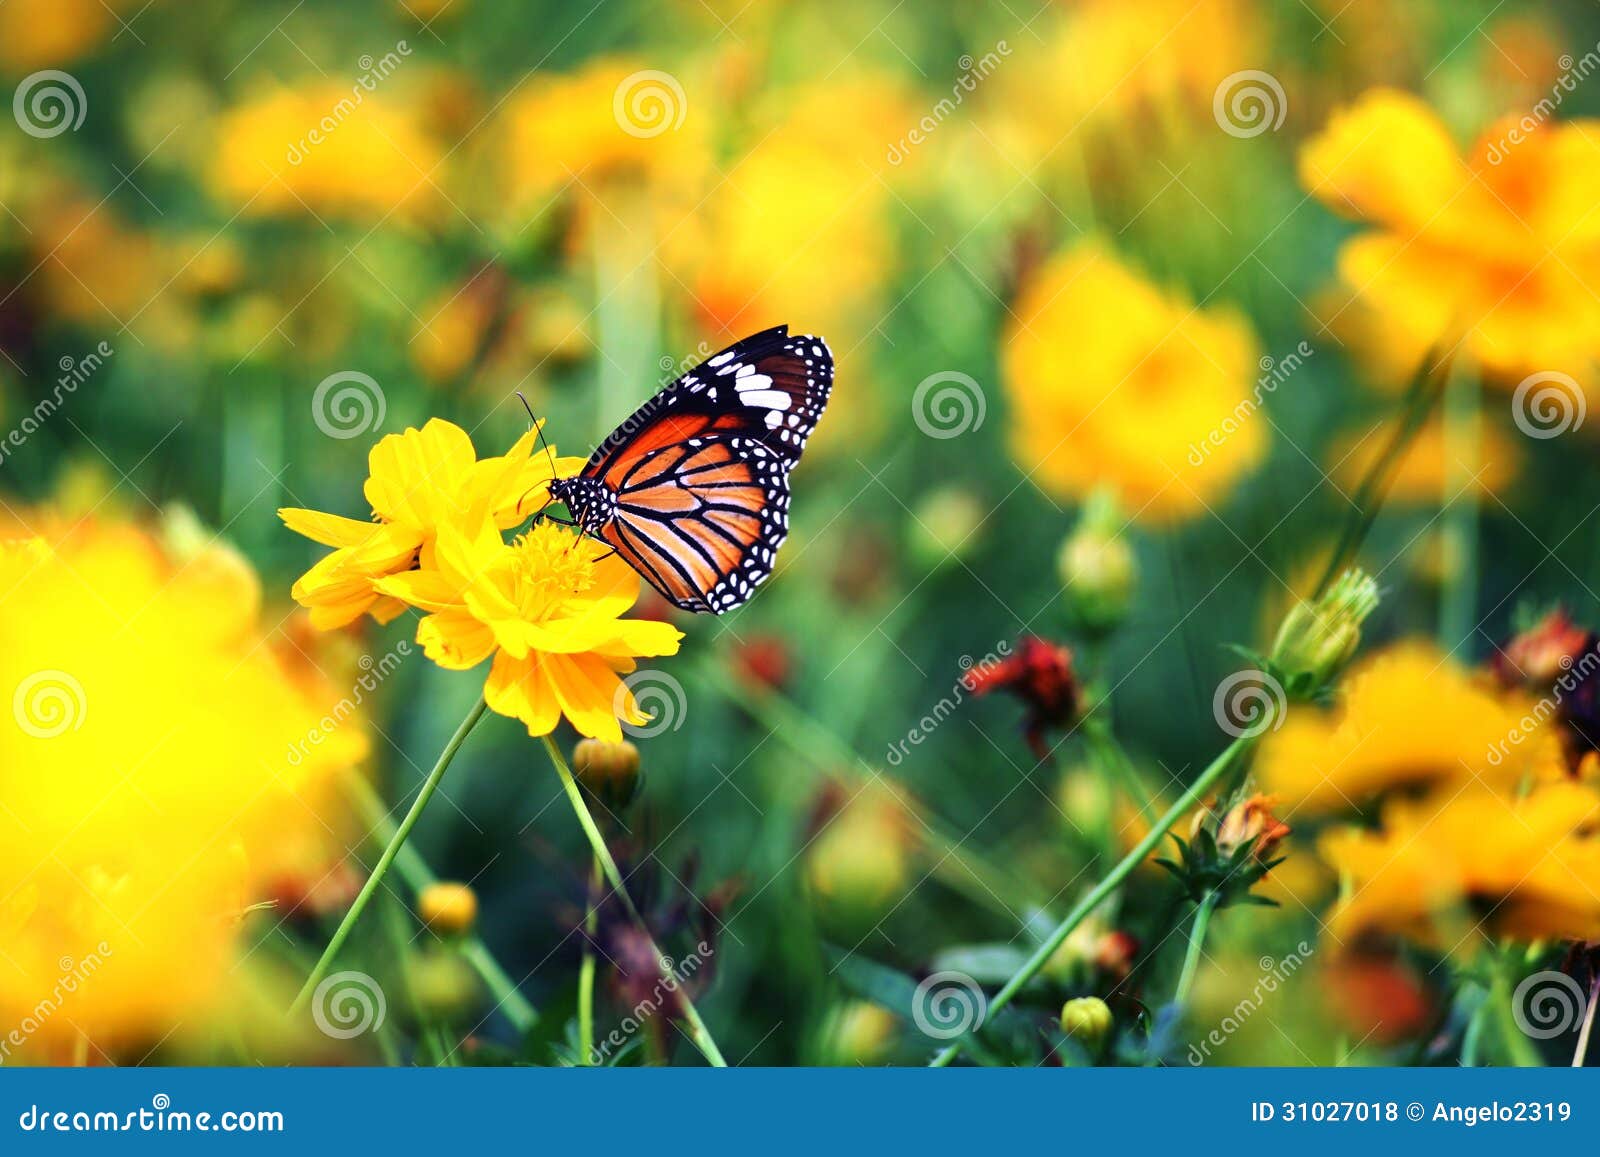 Beautiful Butterfly Stay in Yellow Flowers Stock Photo - Image of ...